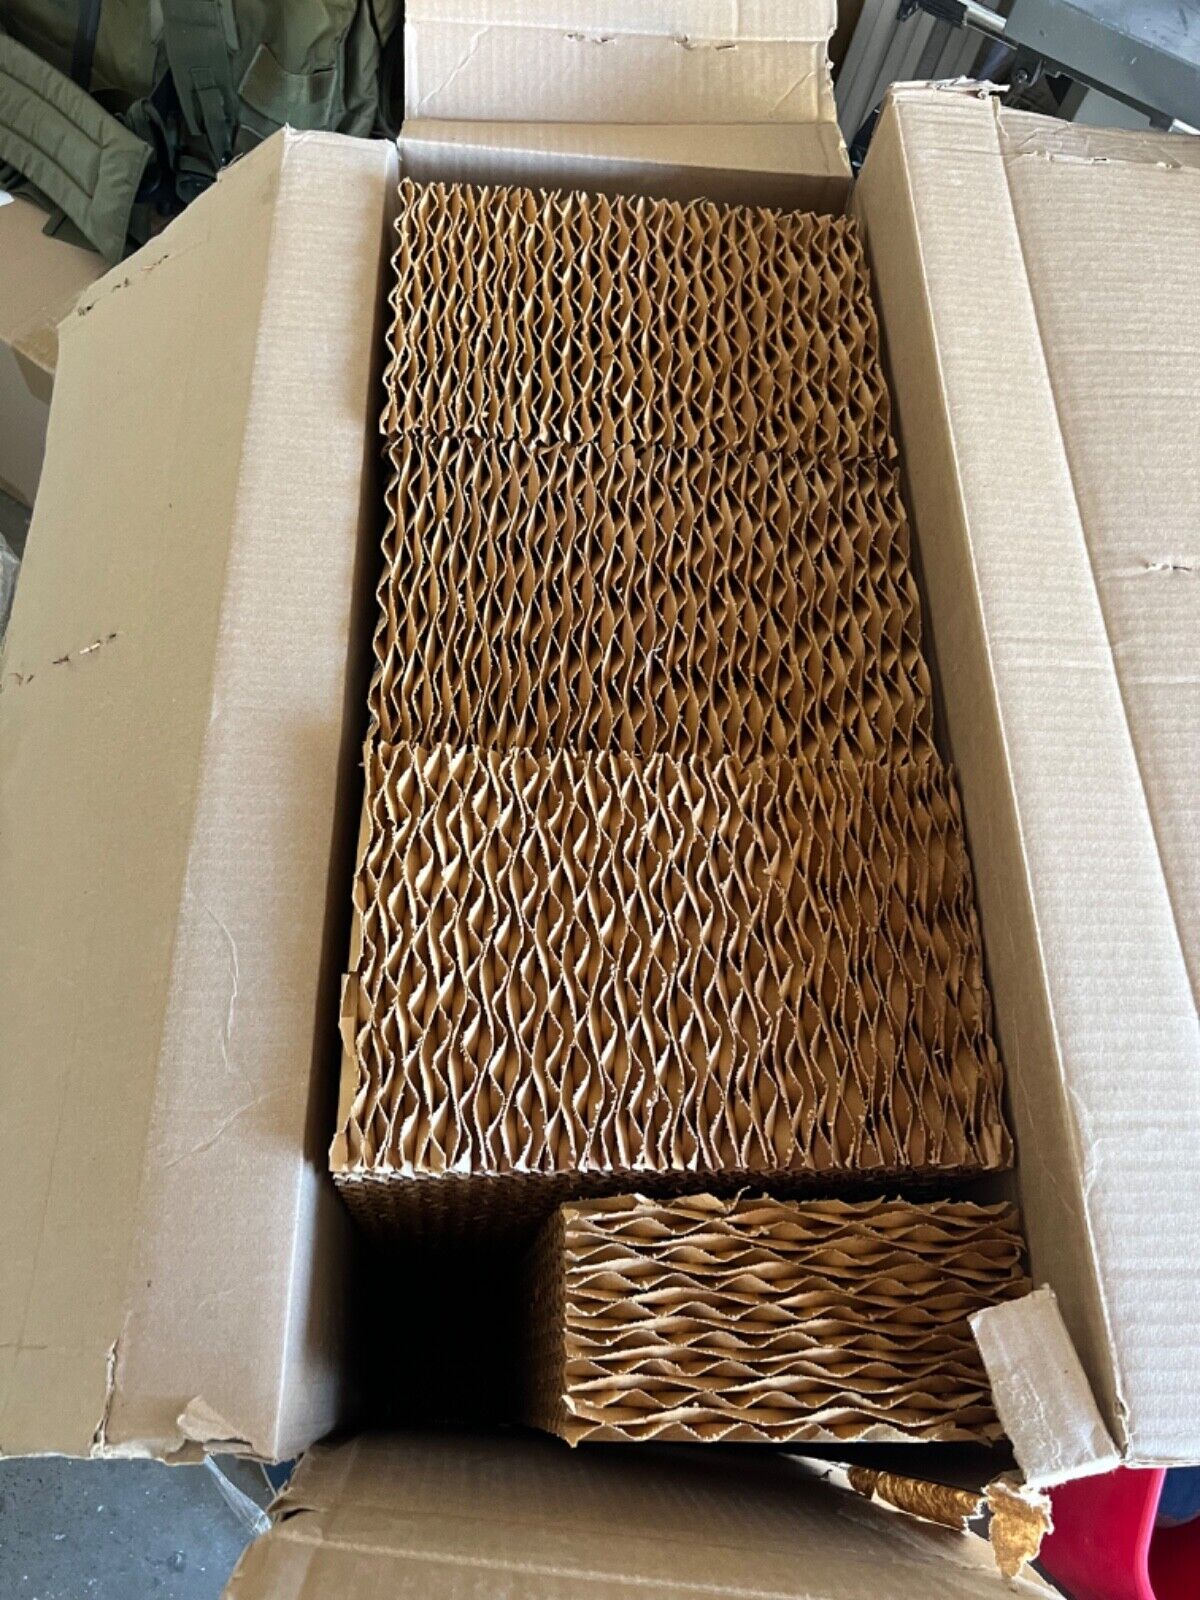 6”Evaporative Media from Kuul; used in PORTACOOL Systems: PARKULCYC300